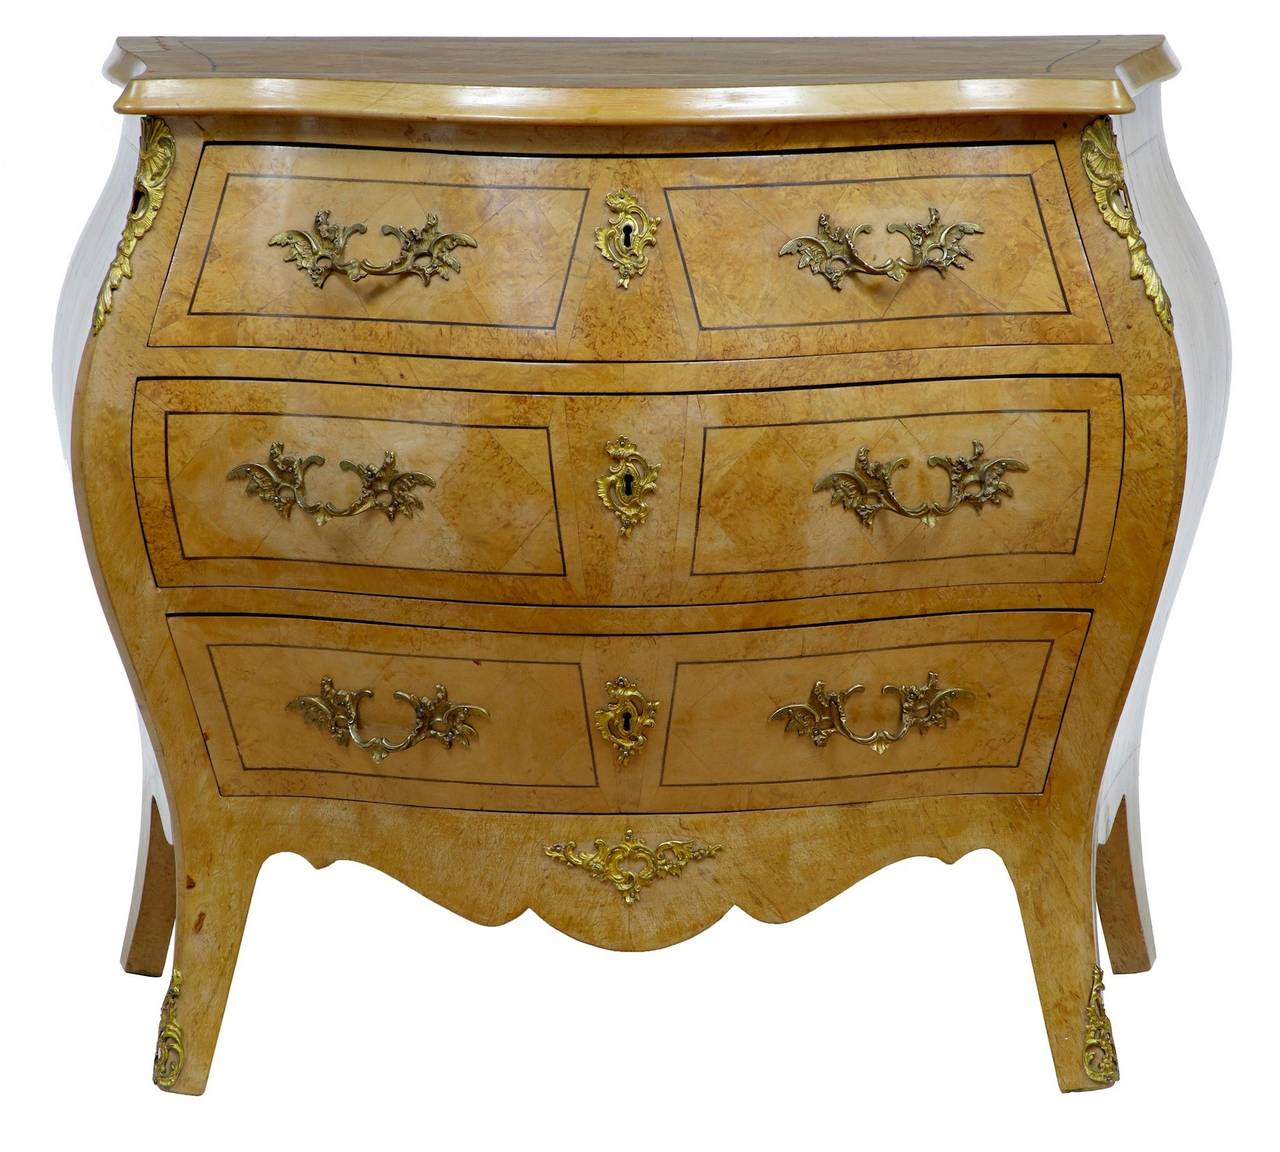 Early 20th century birch root Swedish bombe chest of drawers

Beautiful three-drawer chest of drawers, circa 1920.

Bombe in shape, this chest a stunning patina and parquet diamonds to the top, drawer fronts and sides.

Ormolu mounts to the